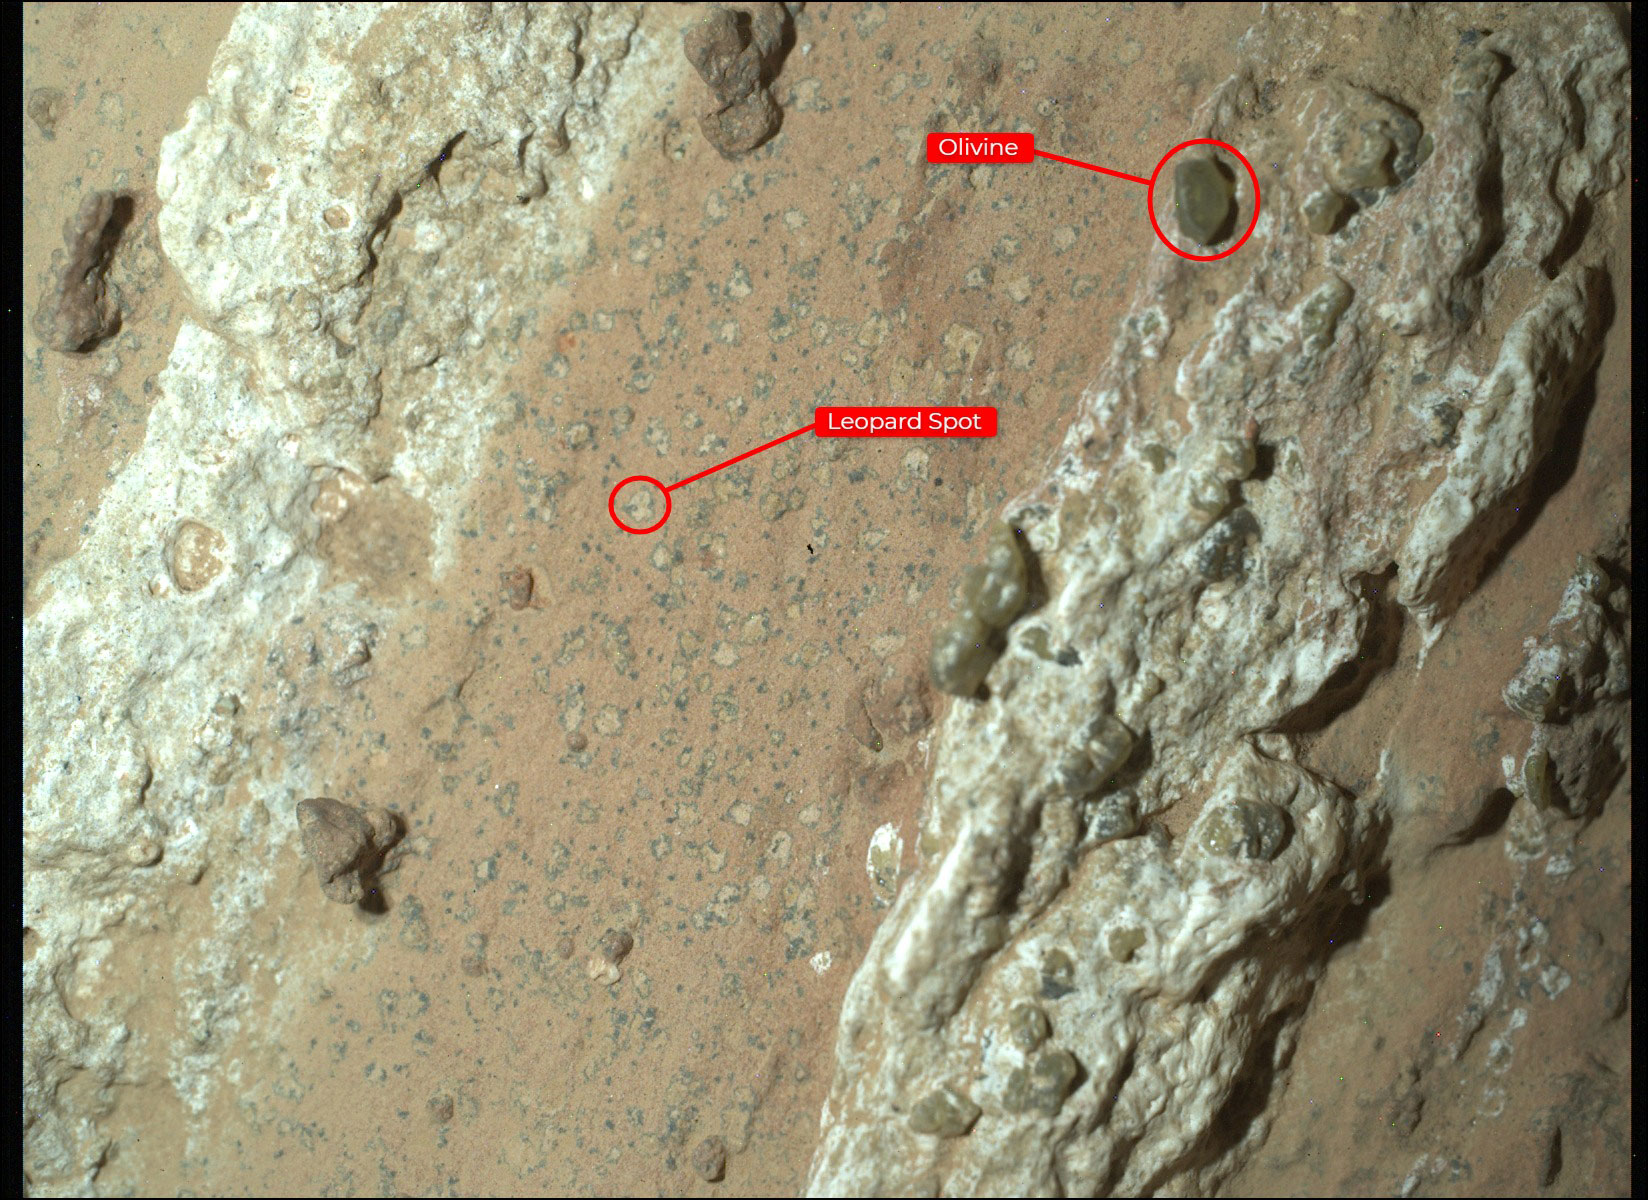 Annotated version of Perseverance finds a rock with 'Leopard Spots'